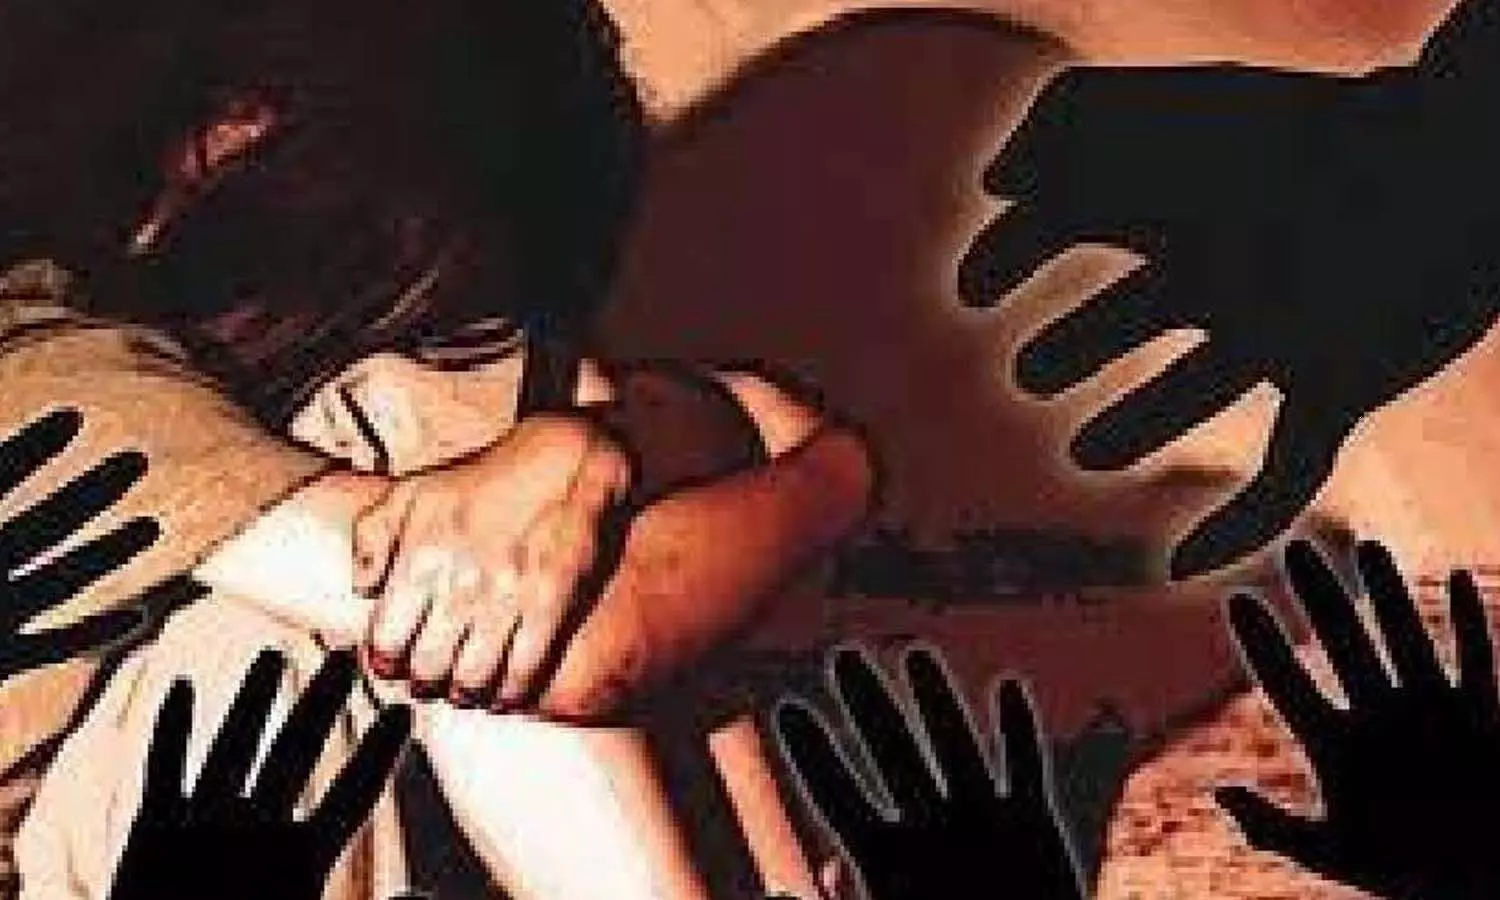 The case of gang-rape with a minor in Maharajganj district has come to light after five months.